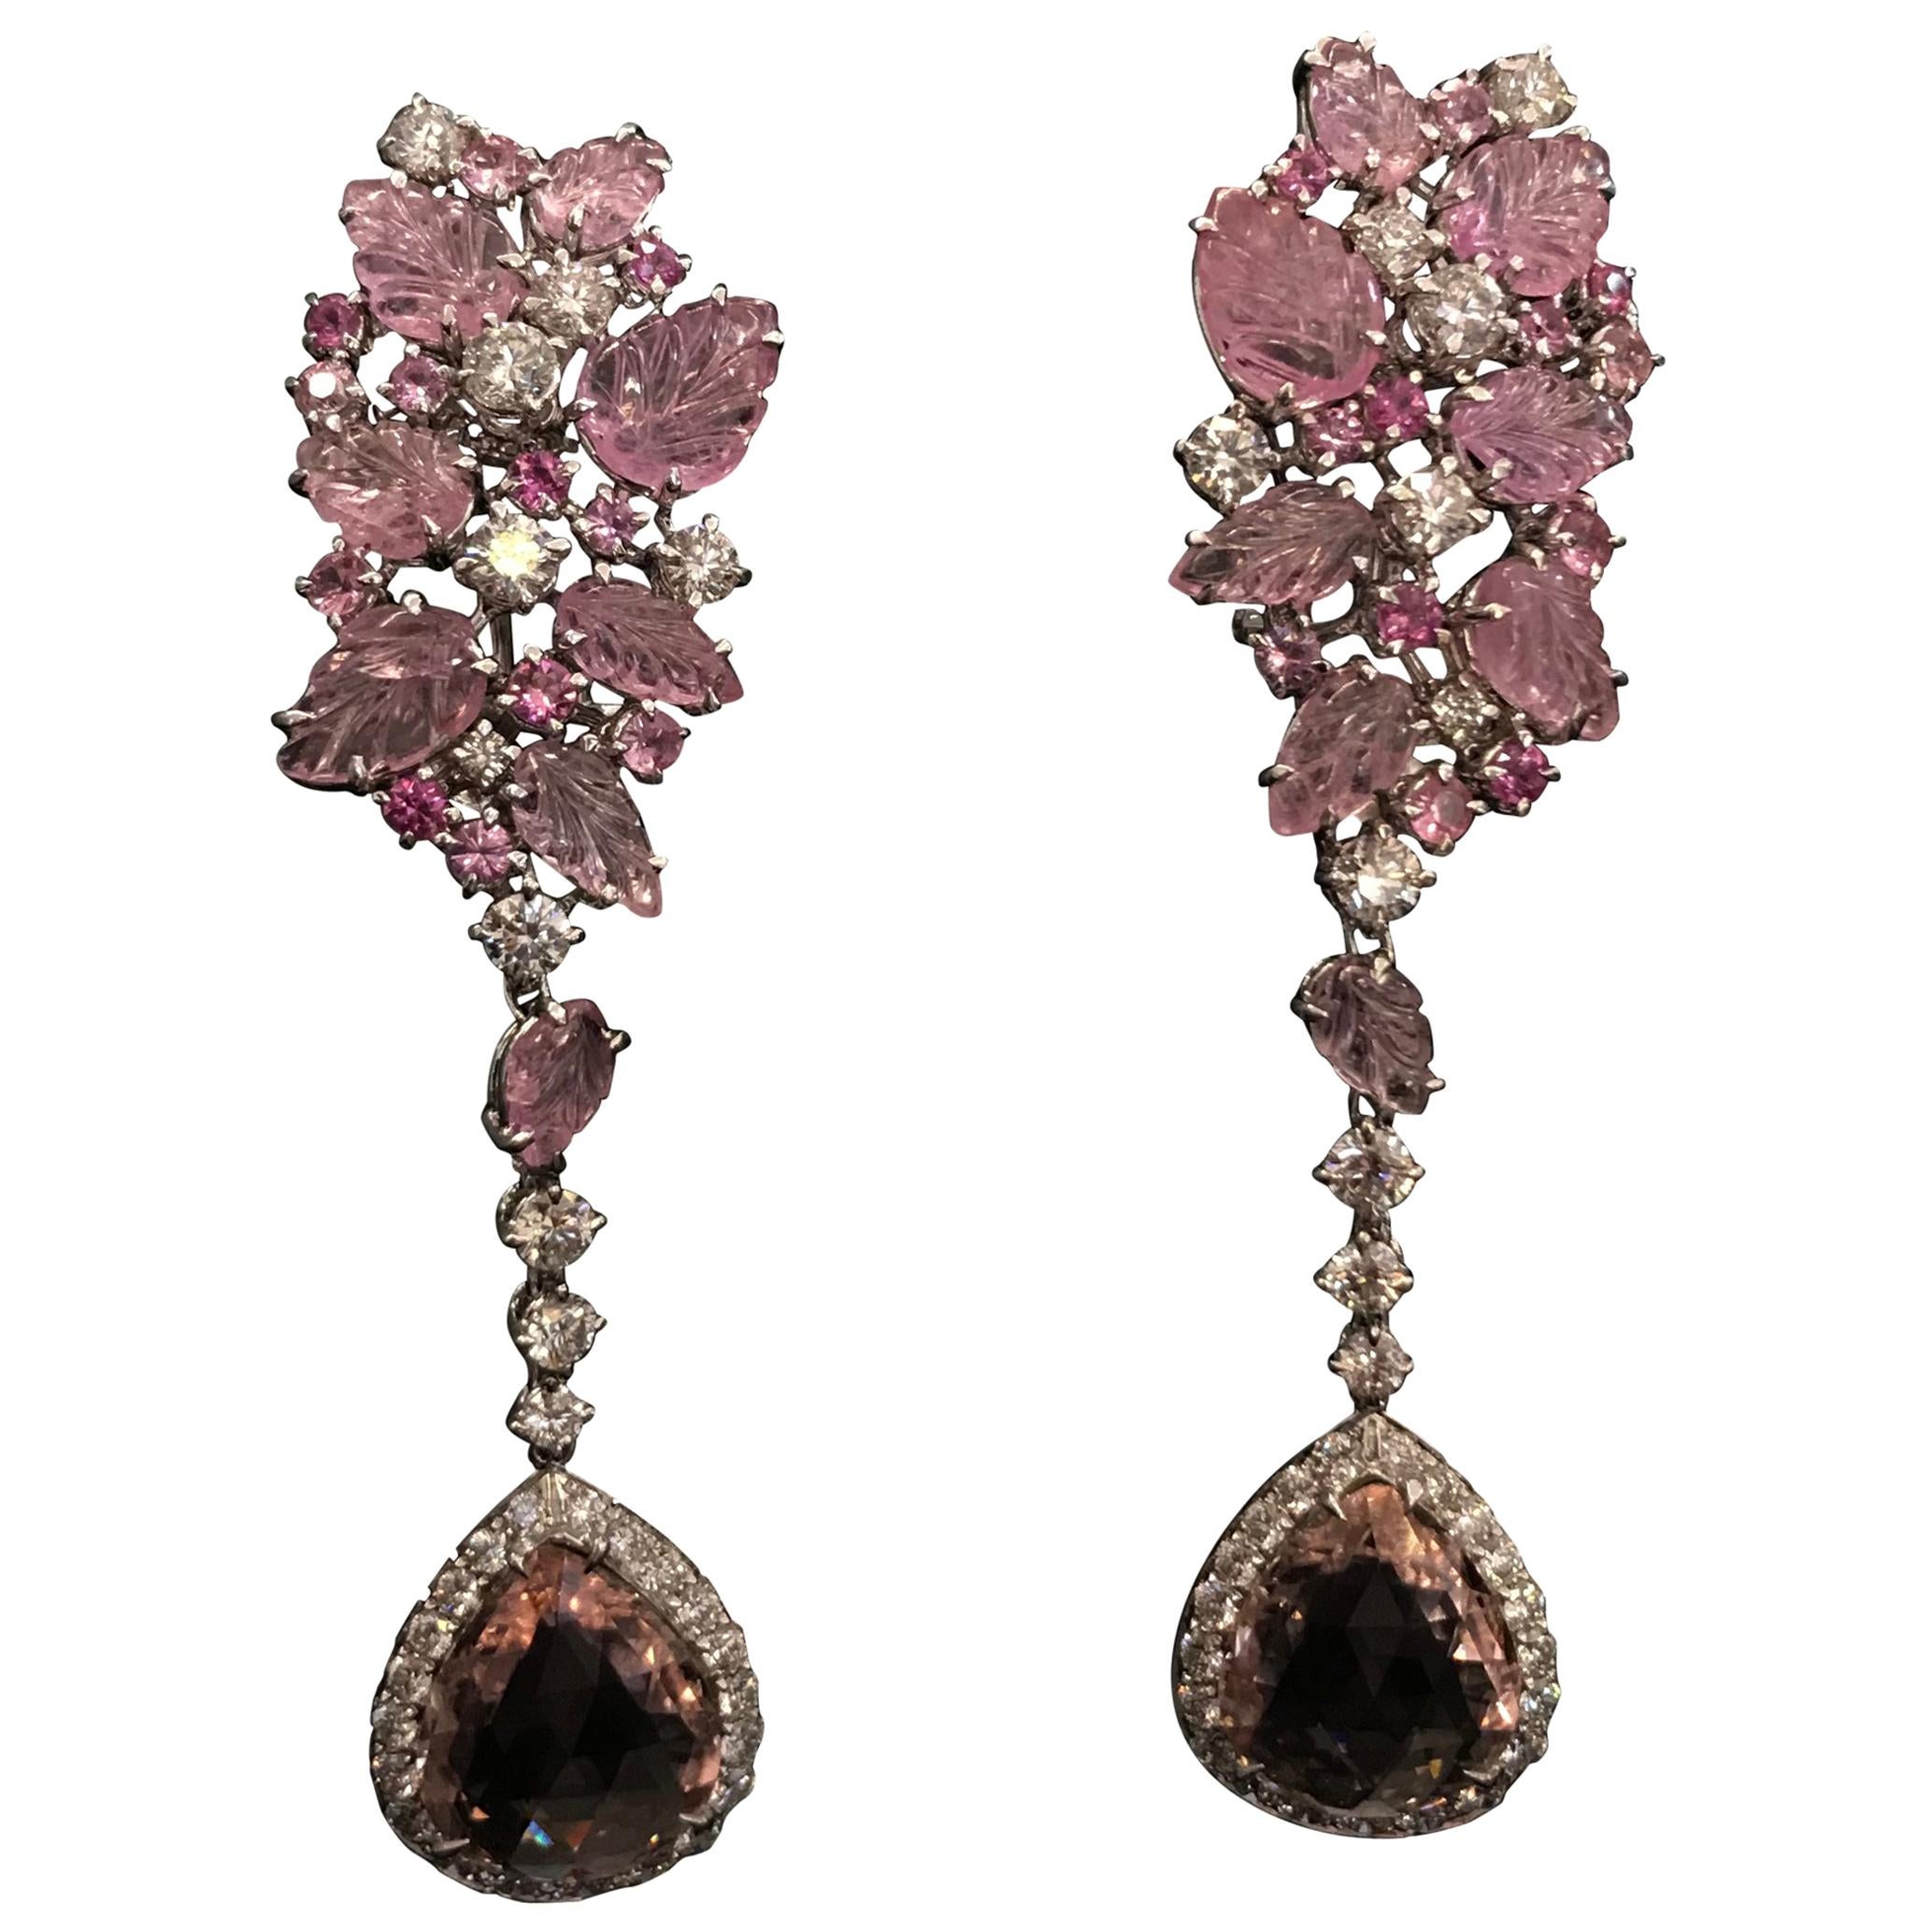 Chandelier Earrings Gold Diamonds Pink Sapphires Pink Tourmaline For Sale